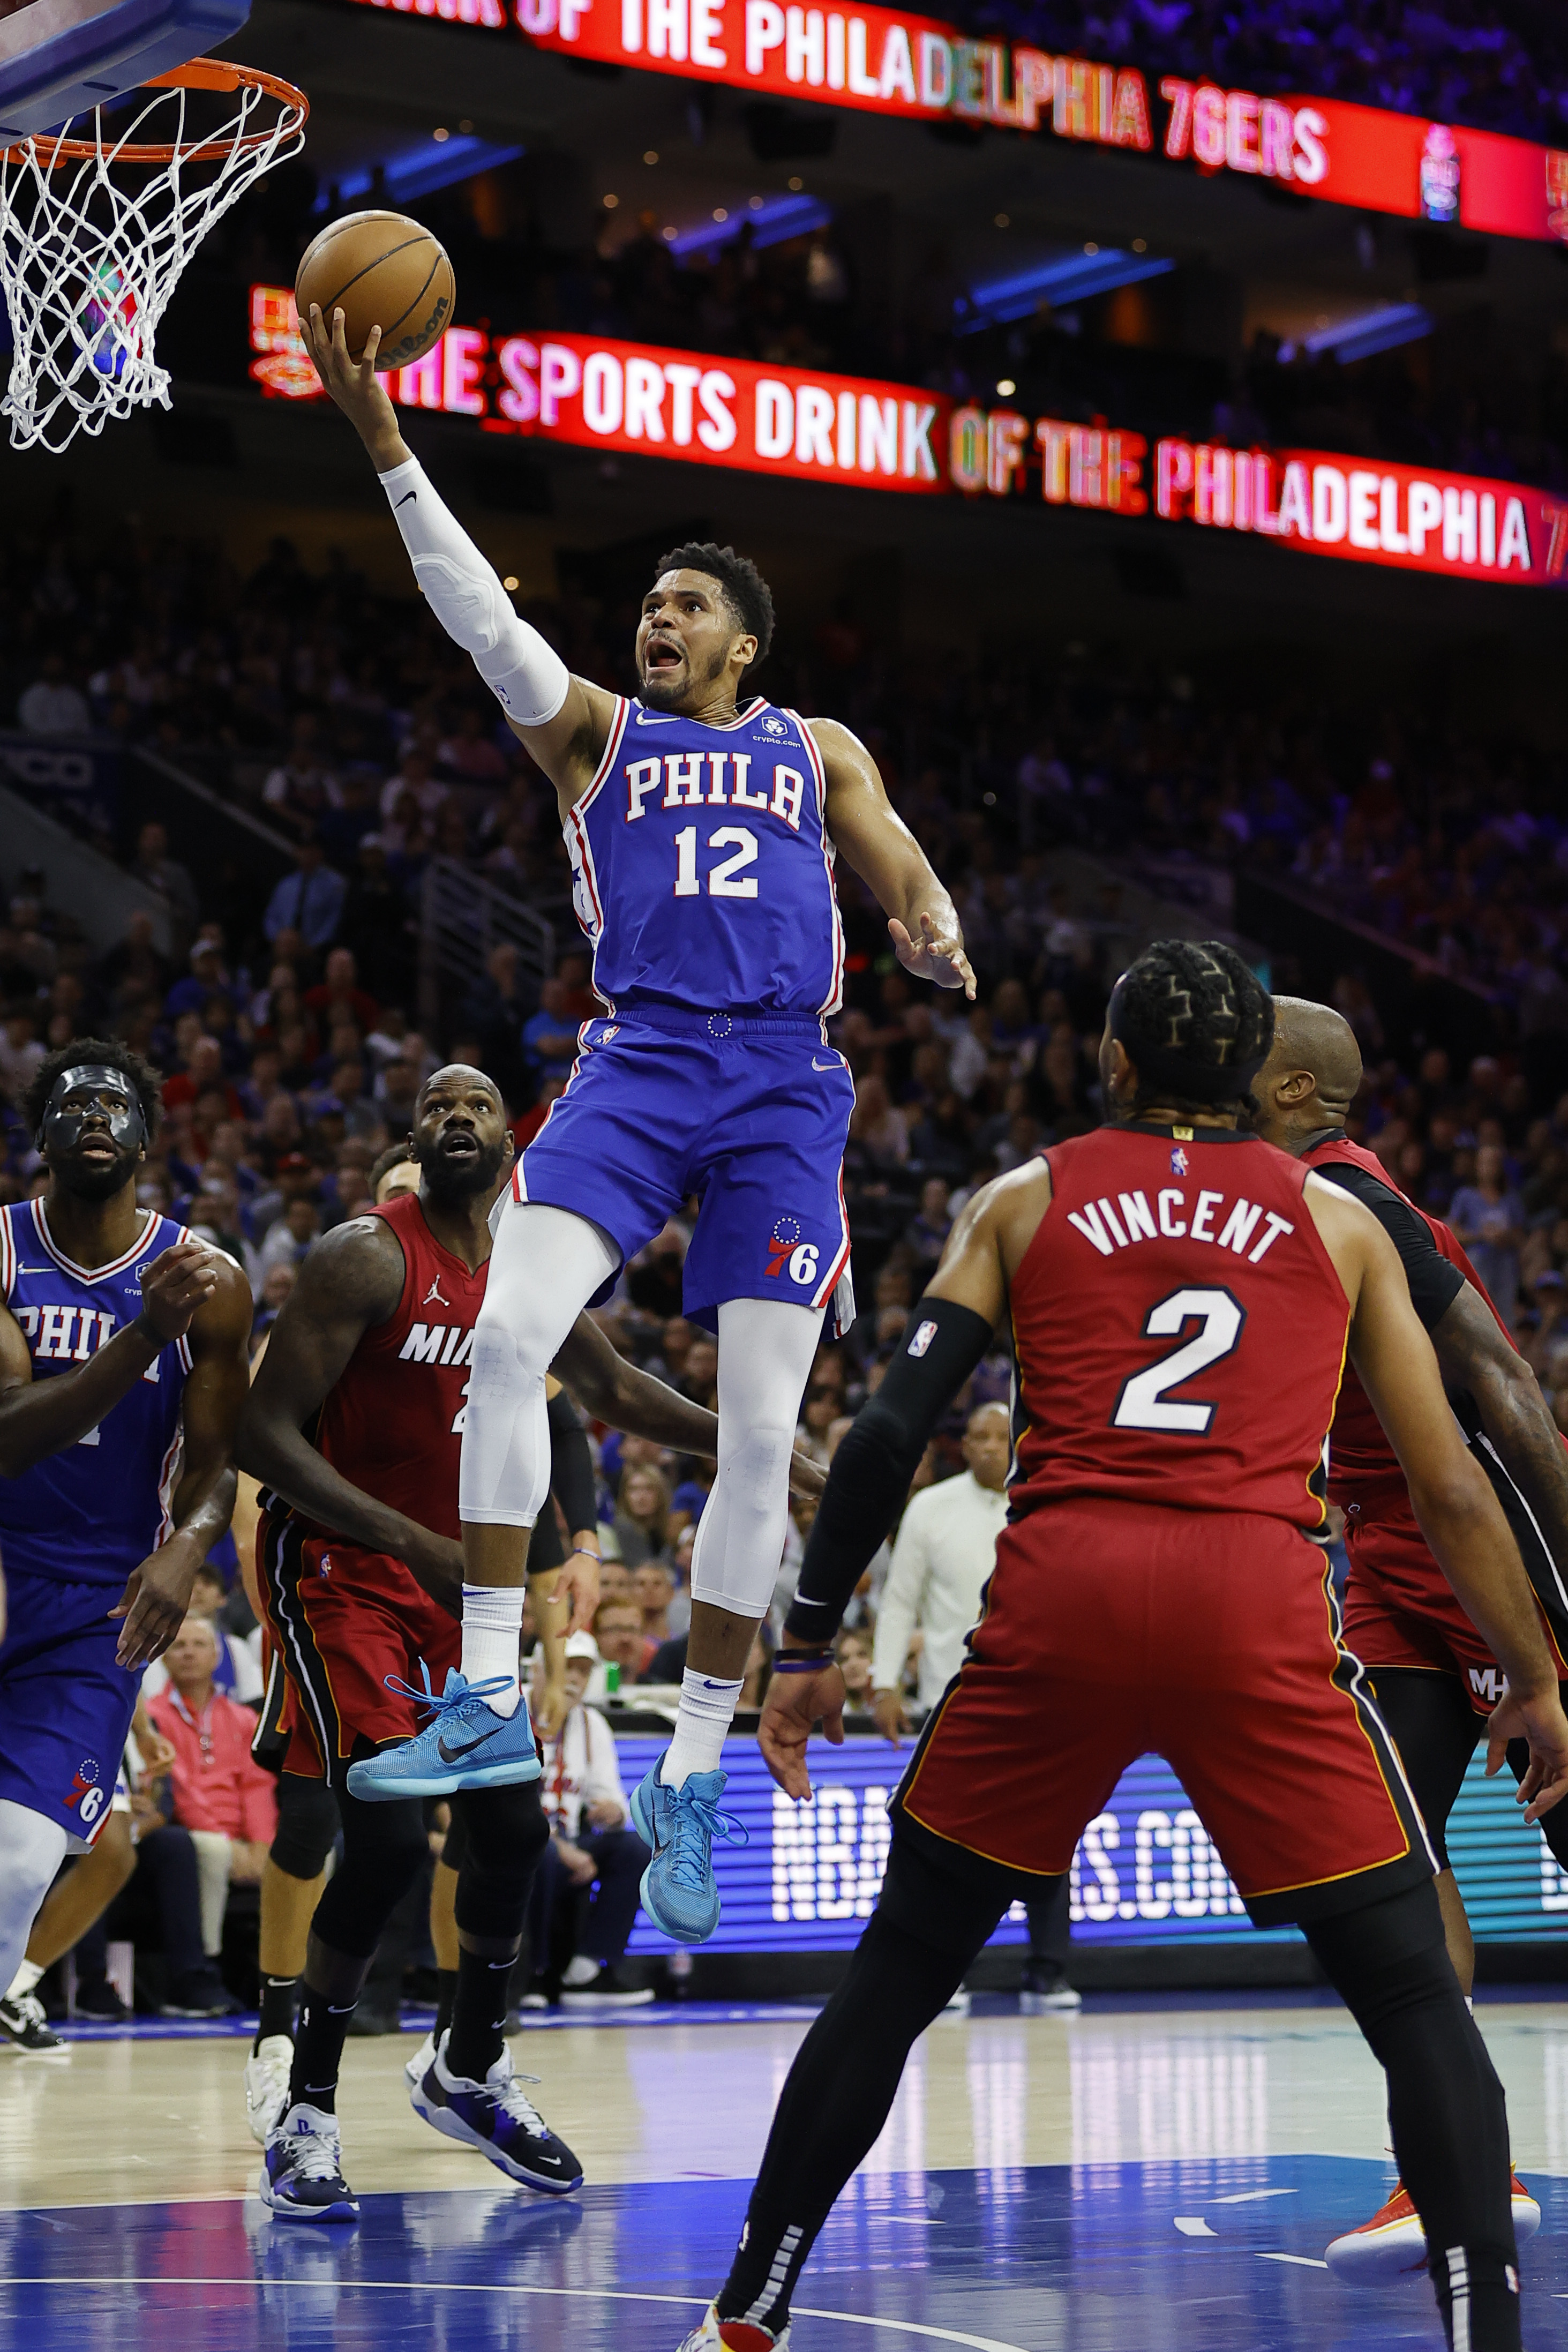 The Philadelphia 76ers' bold bet on failure is paying off ahead of